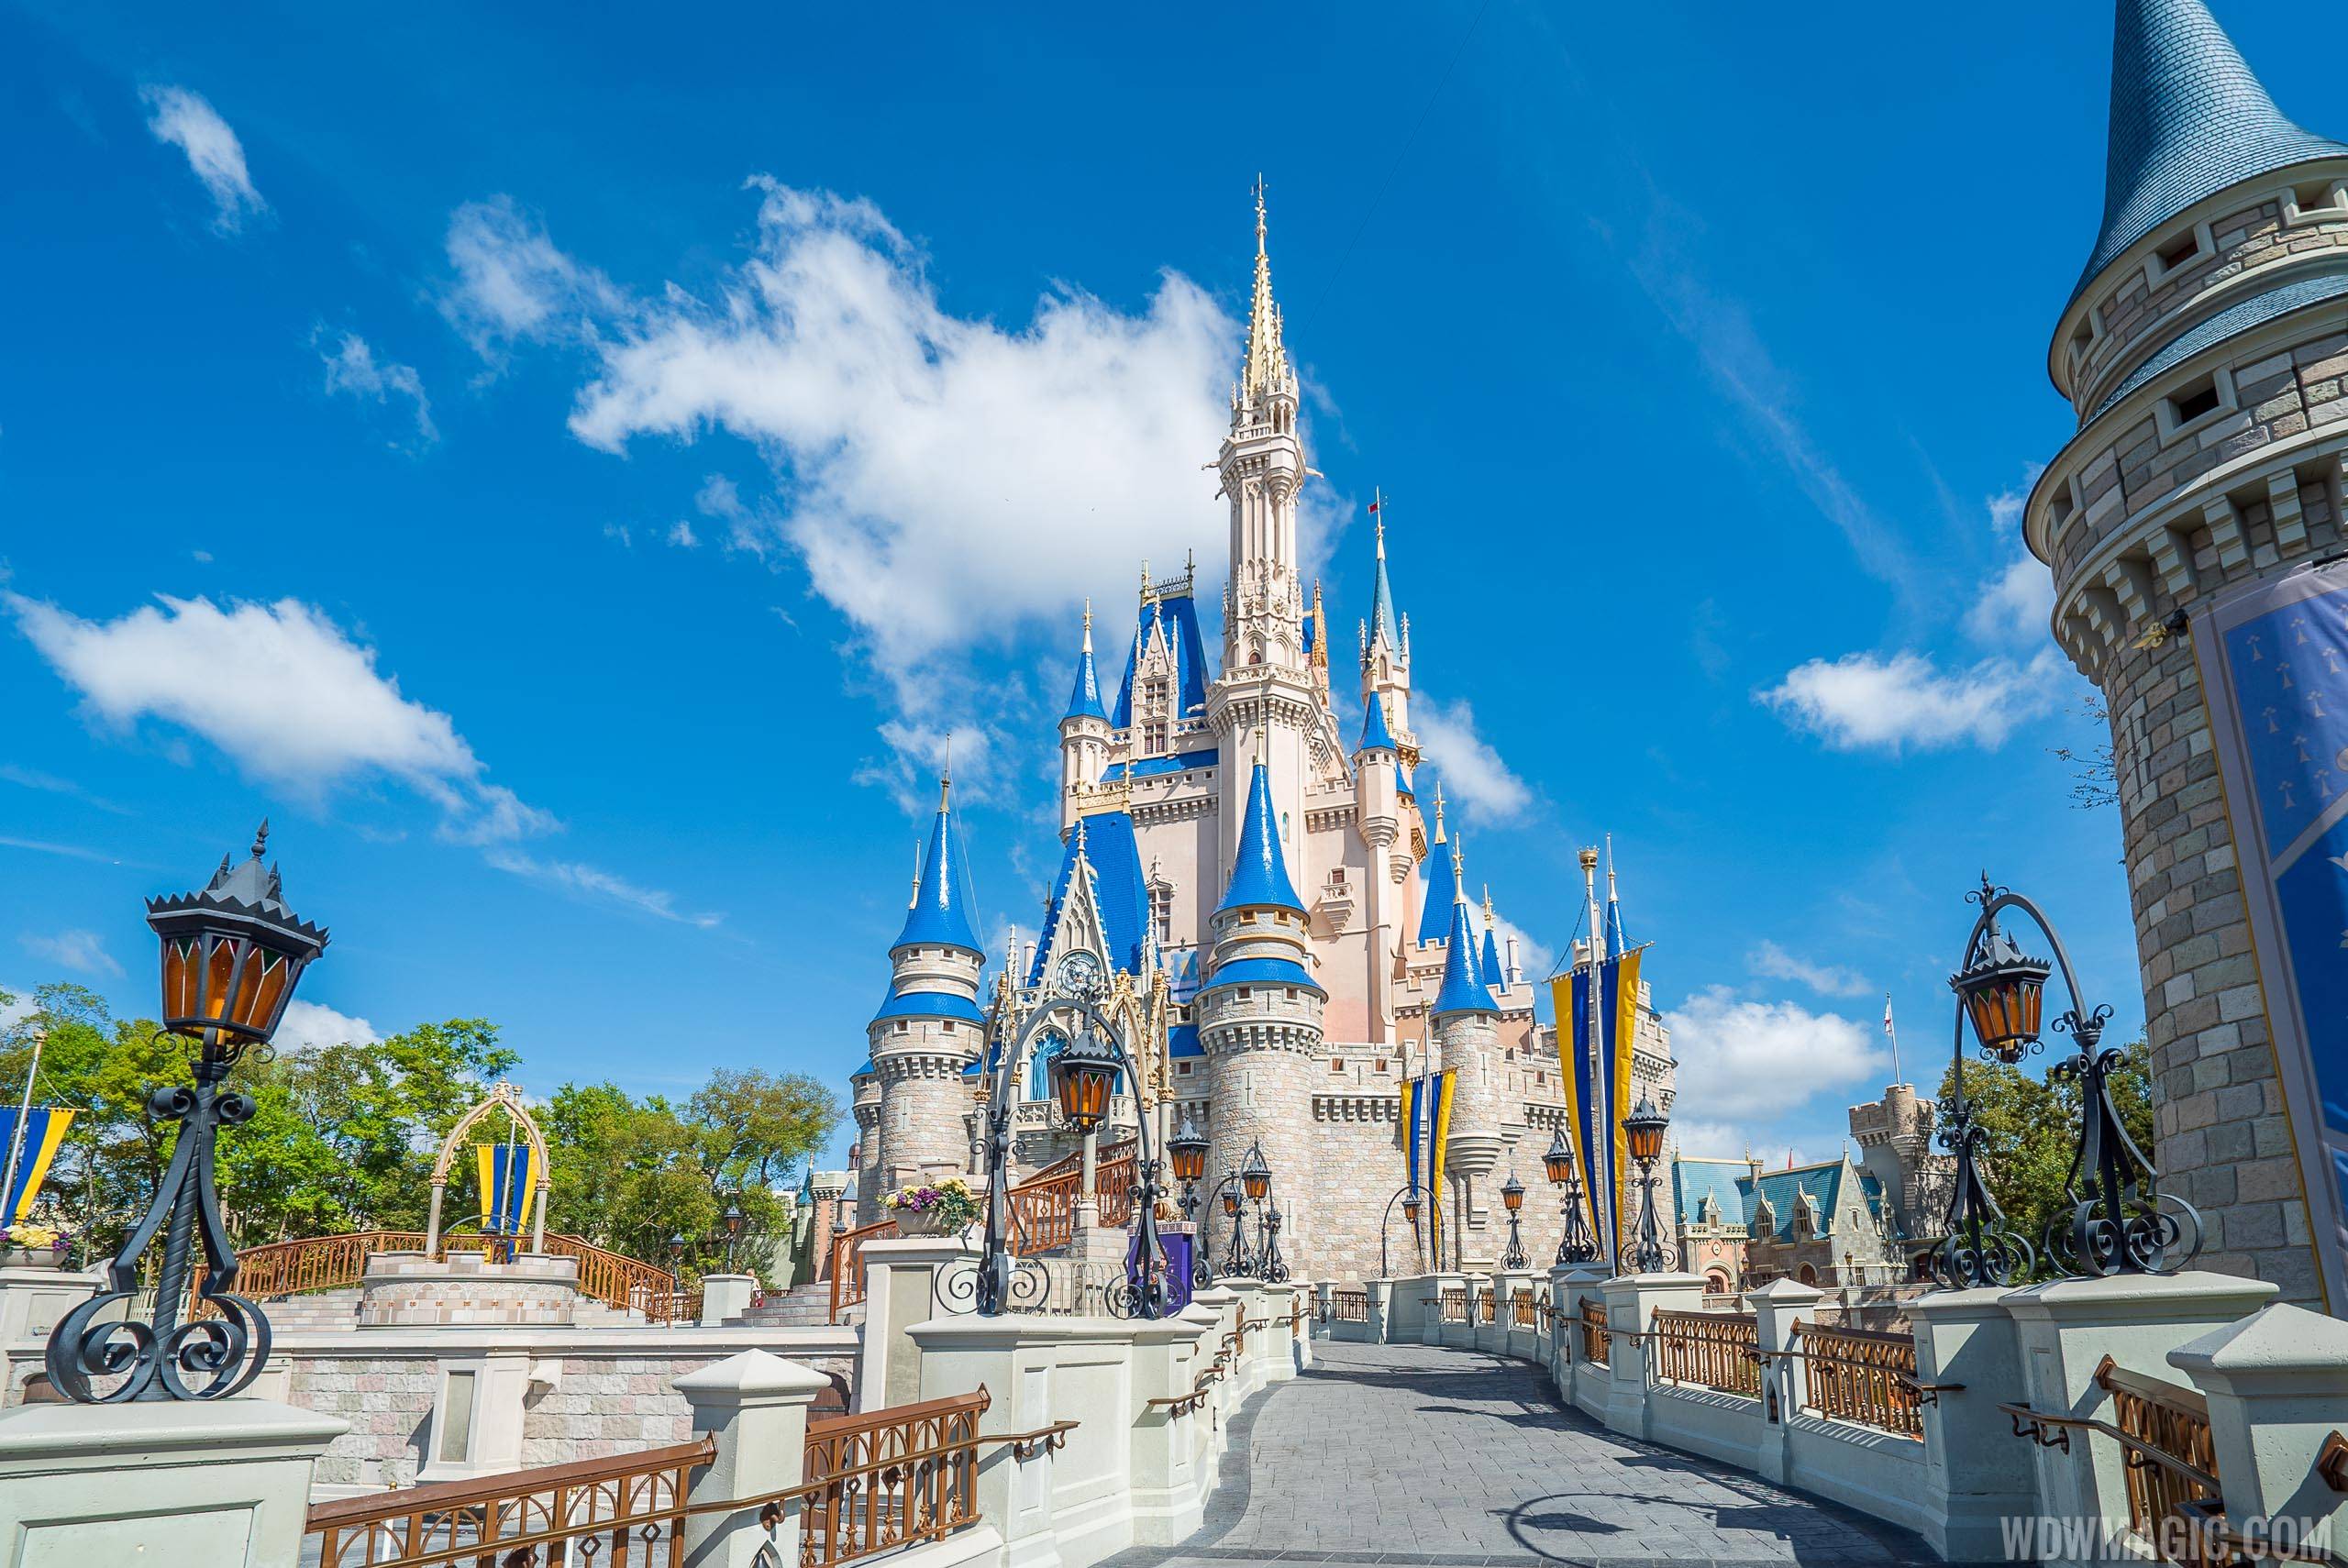 Walt Disney Company Third Quarter 2018 Earnings report shows gains in the parks and resorts